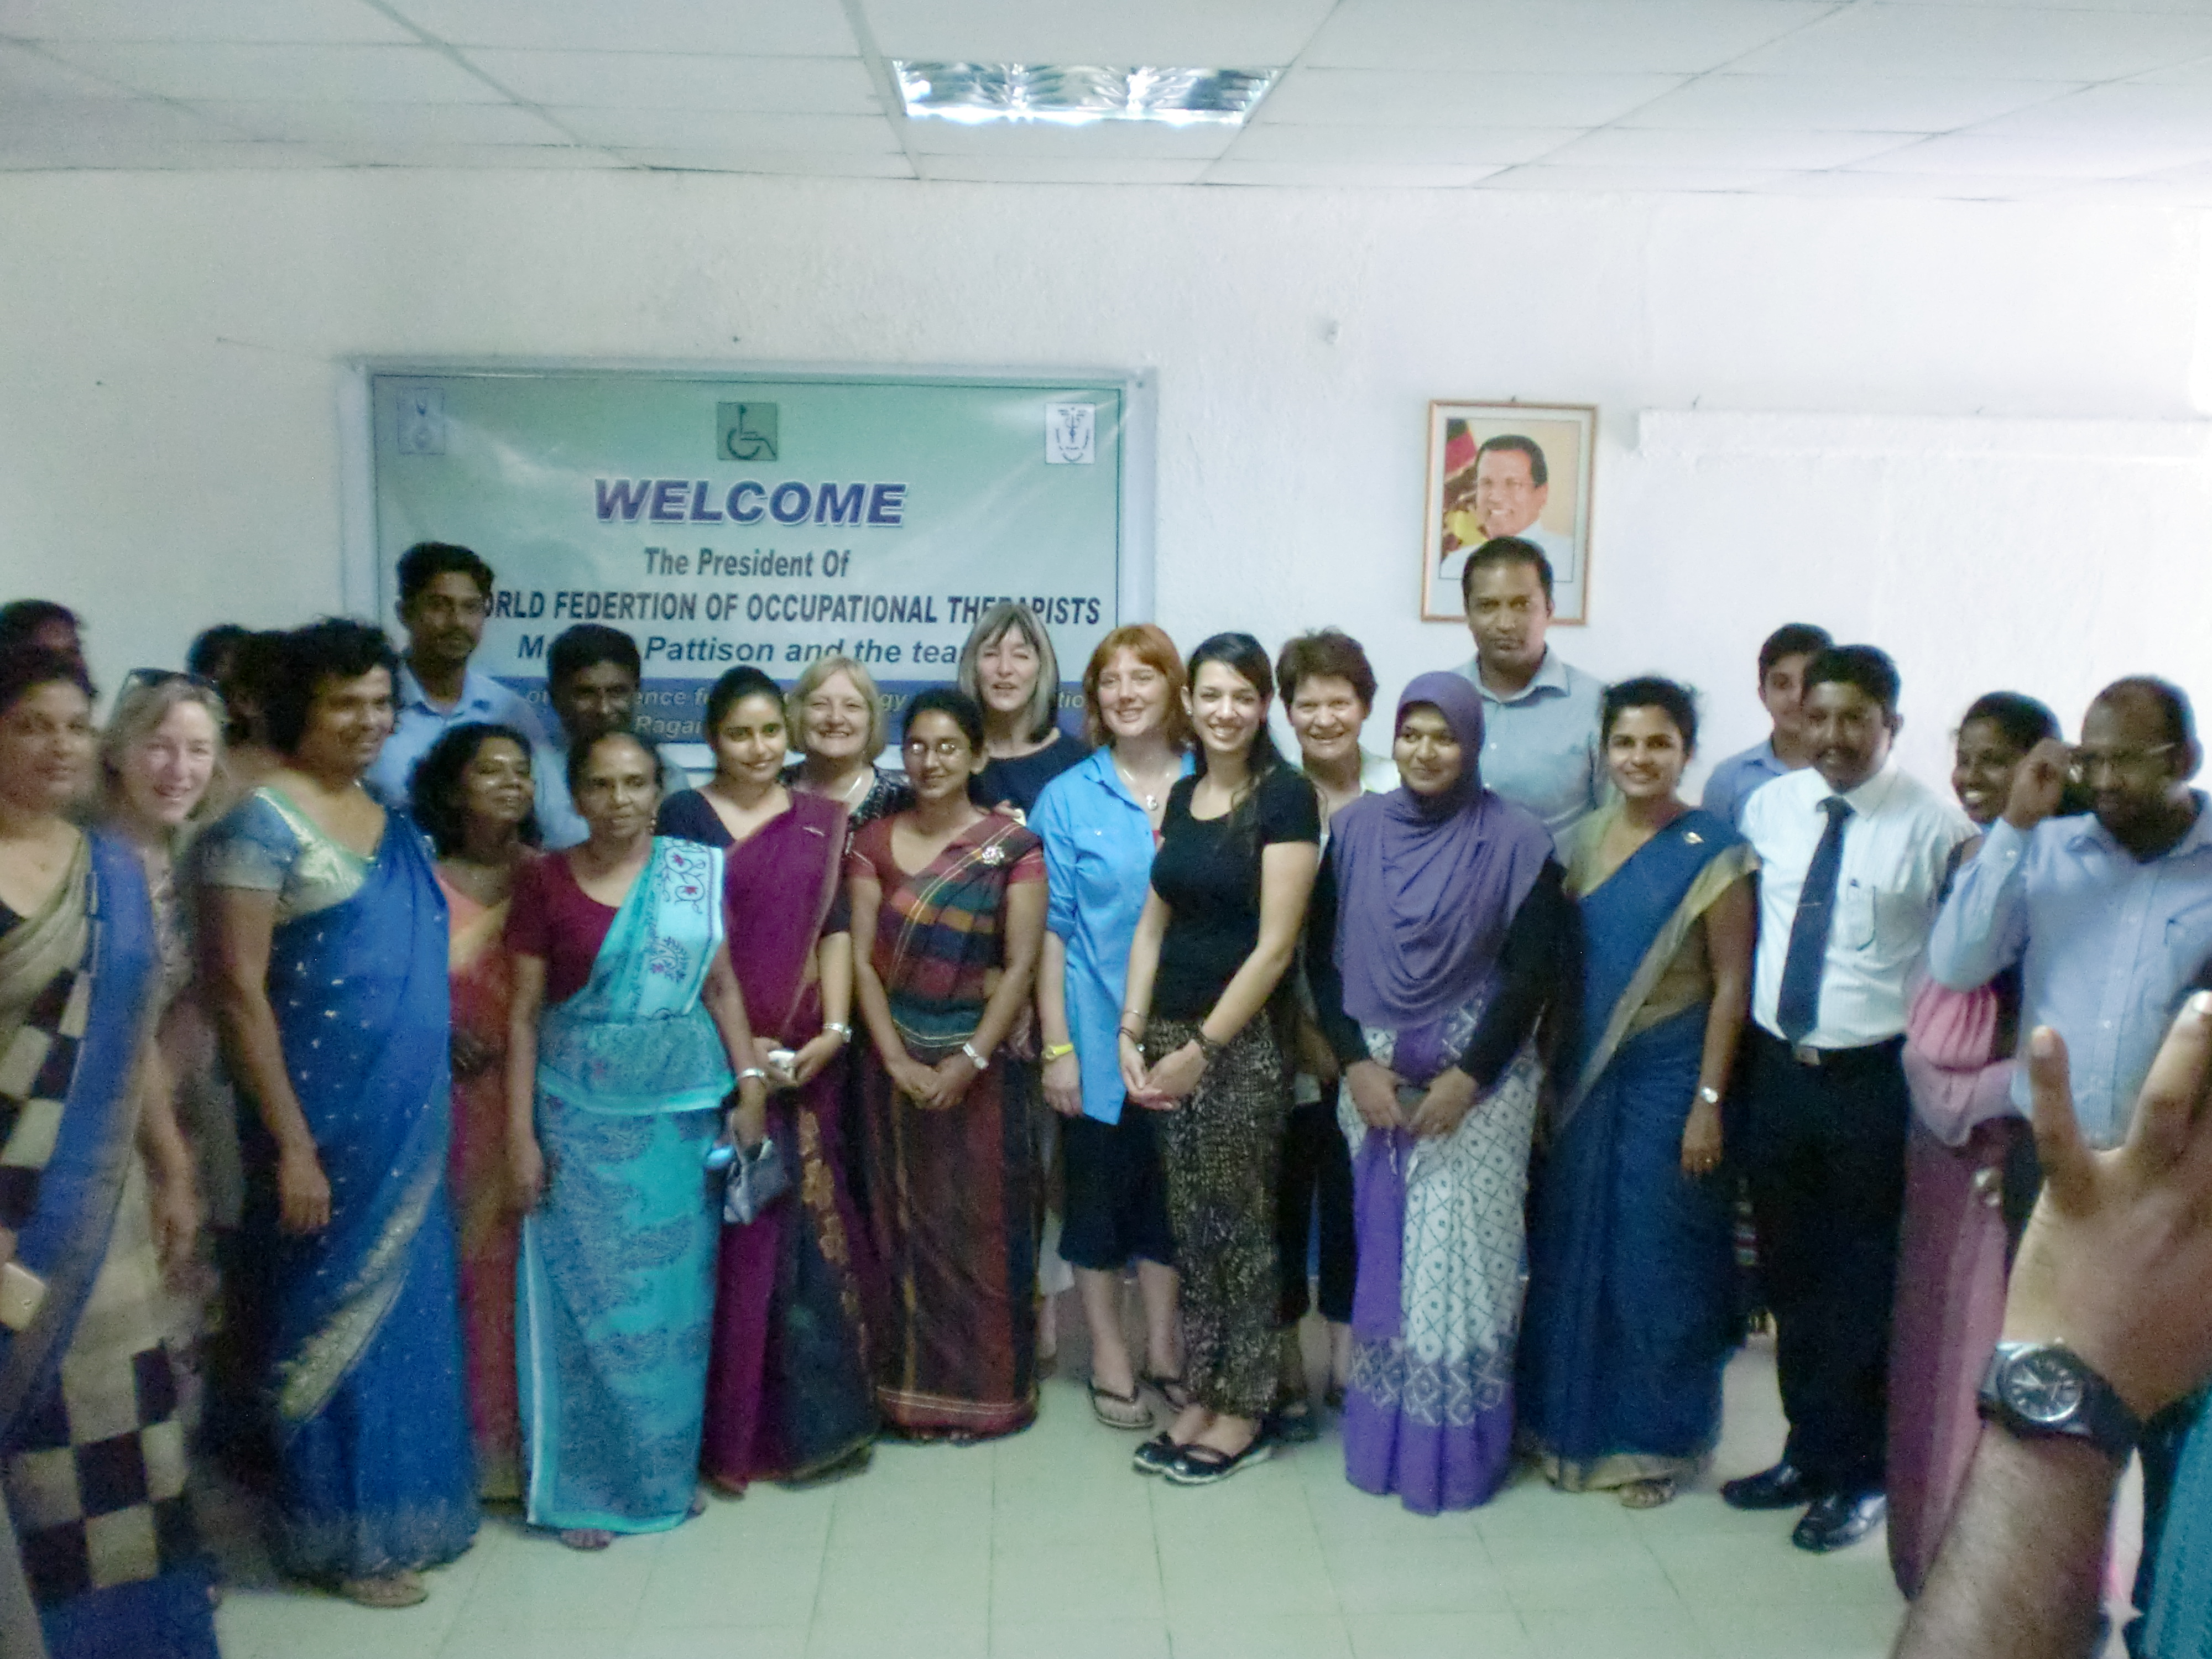 welcome-banner-with-participants-national-rehabilitation-hospital-meeting